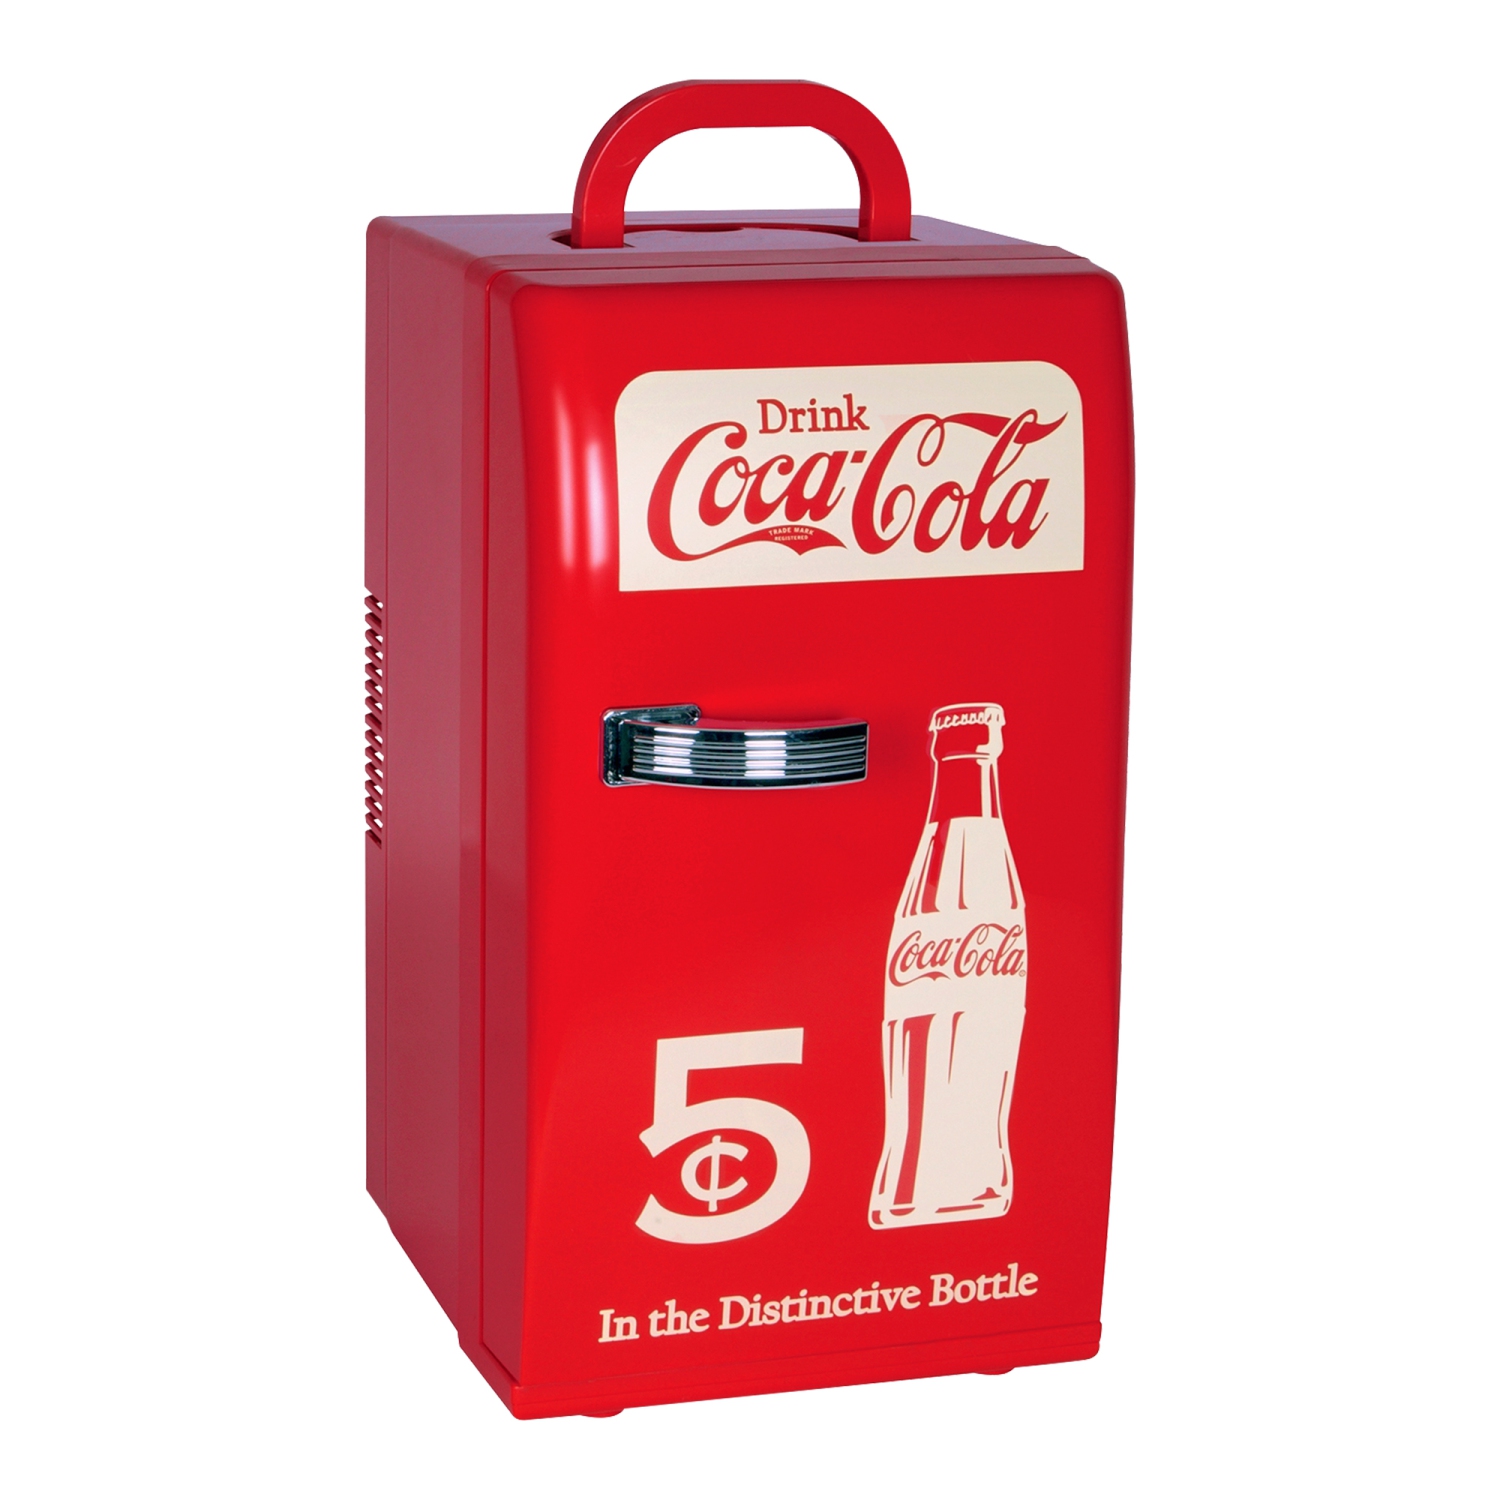 Coca-Cola Retro 18 Can Mini Fridge 22L (23 qt), AC/DC Portable Cooler for Snack Lunch Drinks, Includes 12V and AC Cords, for Home Office Dorm Cottage, Red and White